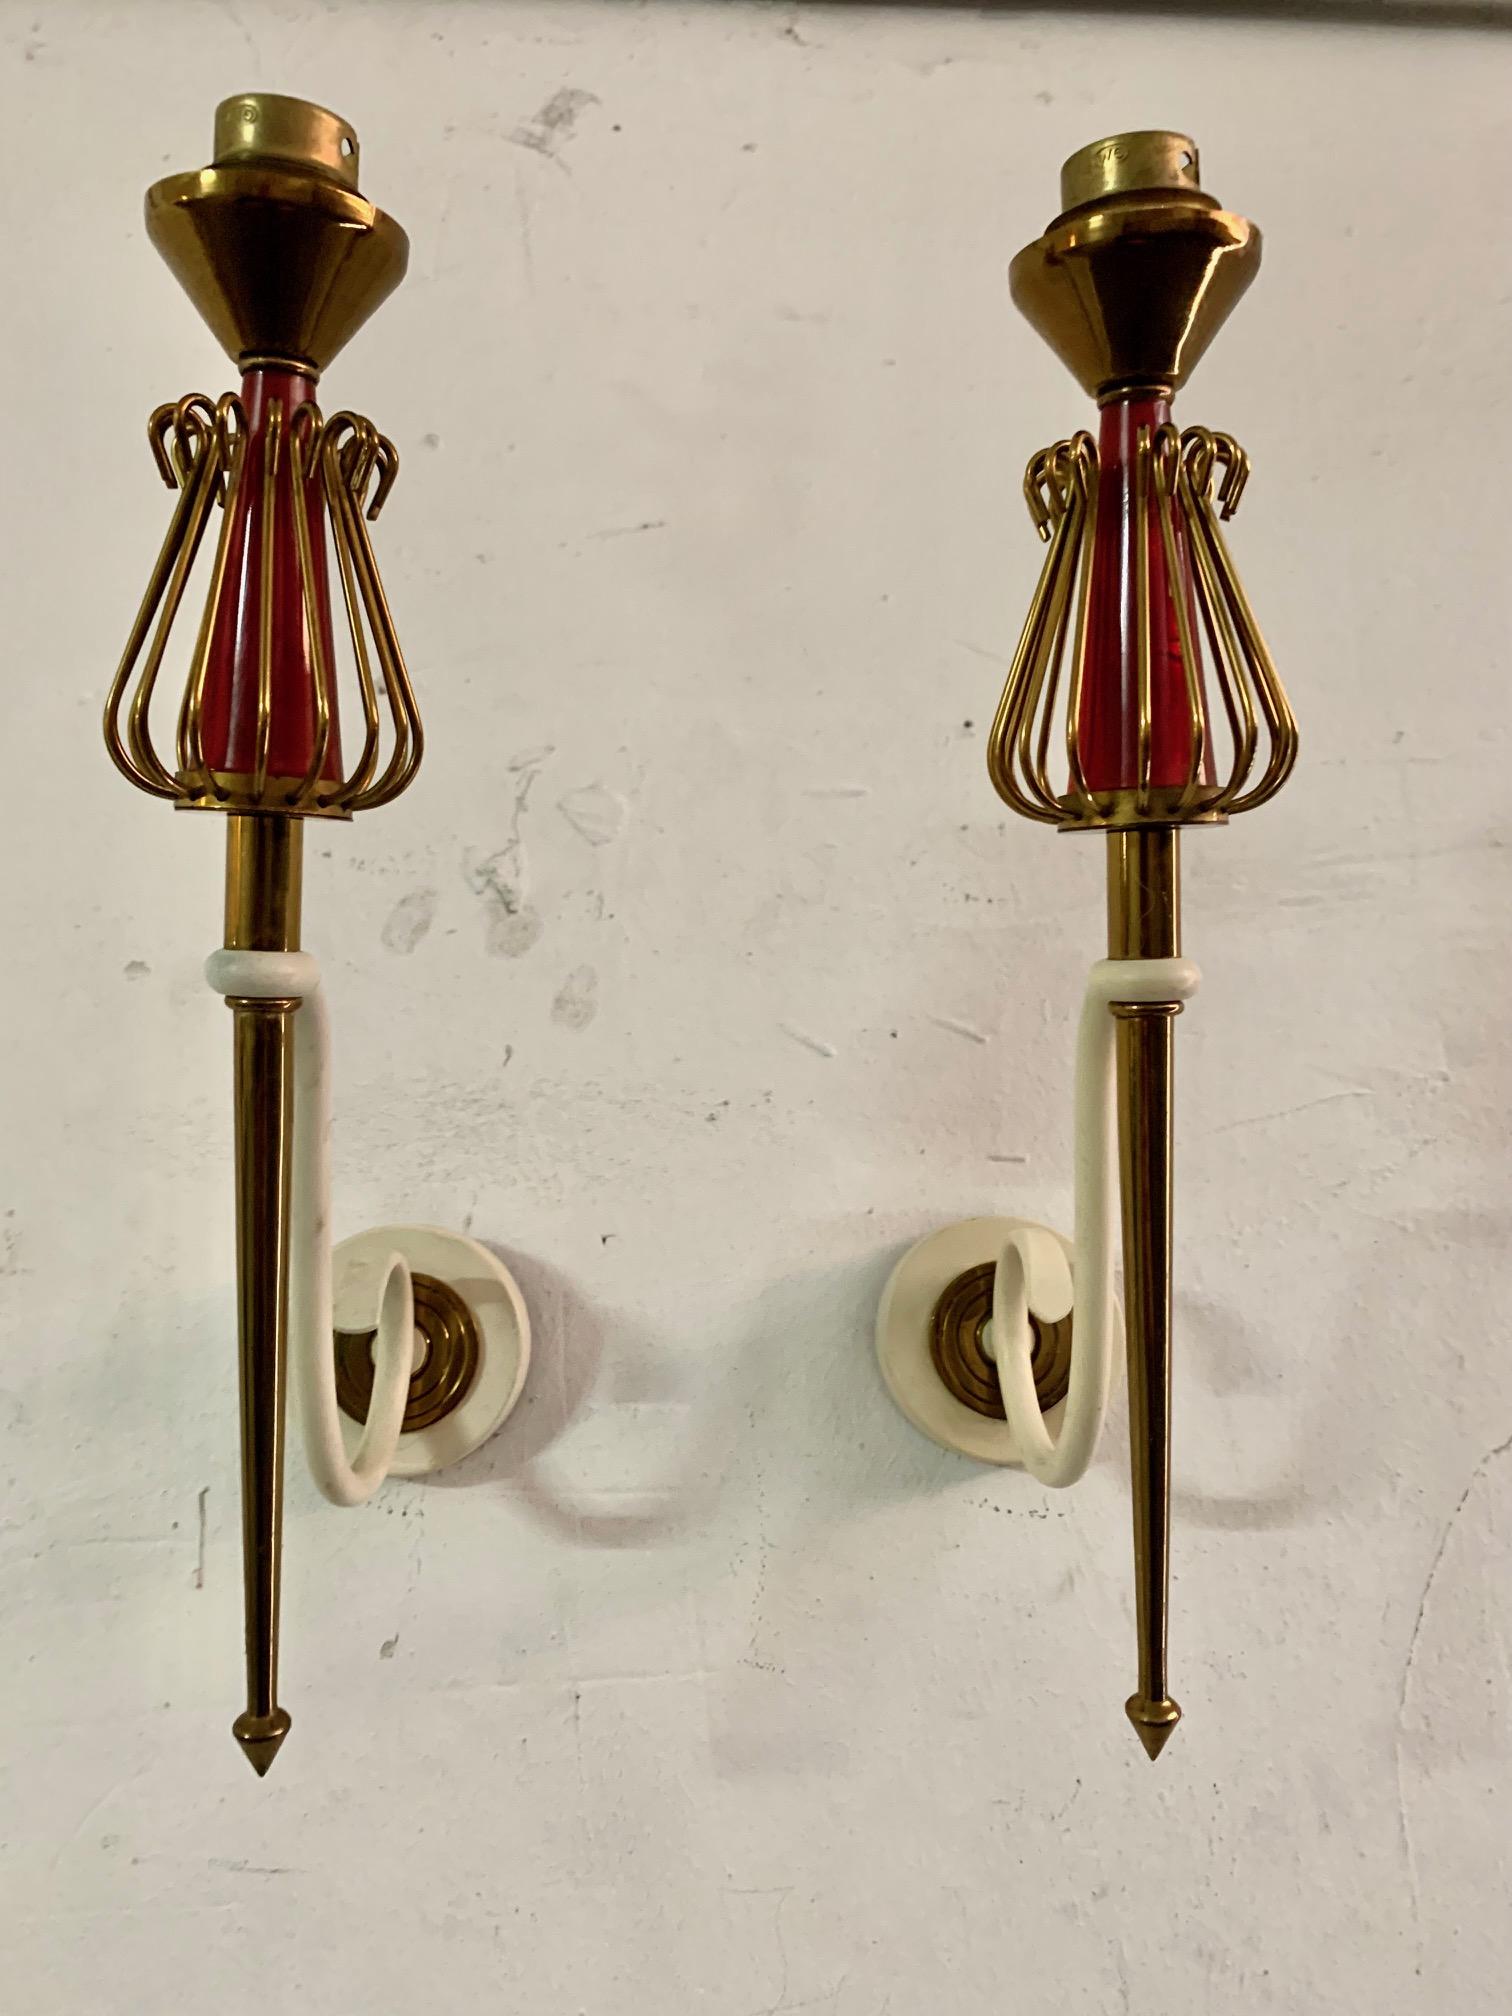 Large pair of 1950's sconces from the Maison Lunel.
Composed of a round wall base on which an arm is placed forming a volute in off-white wrought iron, from which a point-shaped golden brass arm emerges and in its upper part it has a brass wire